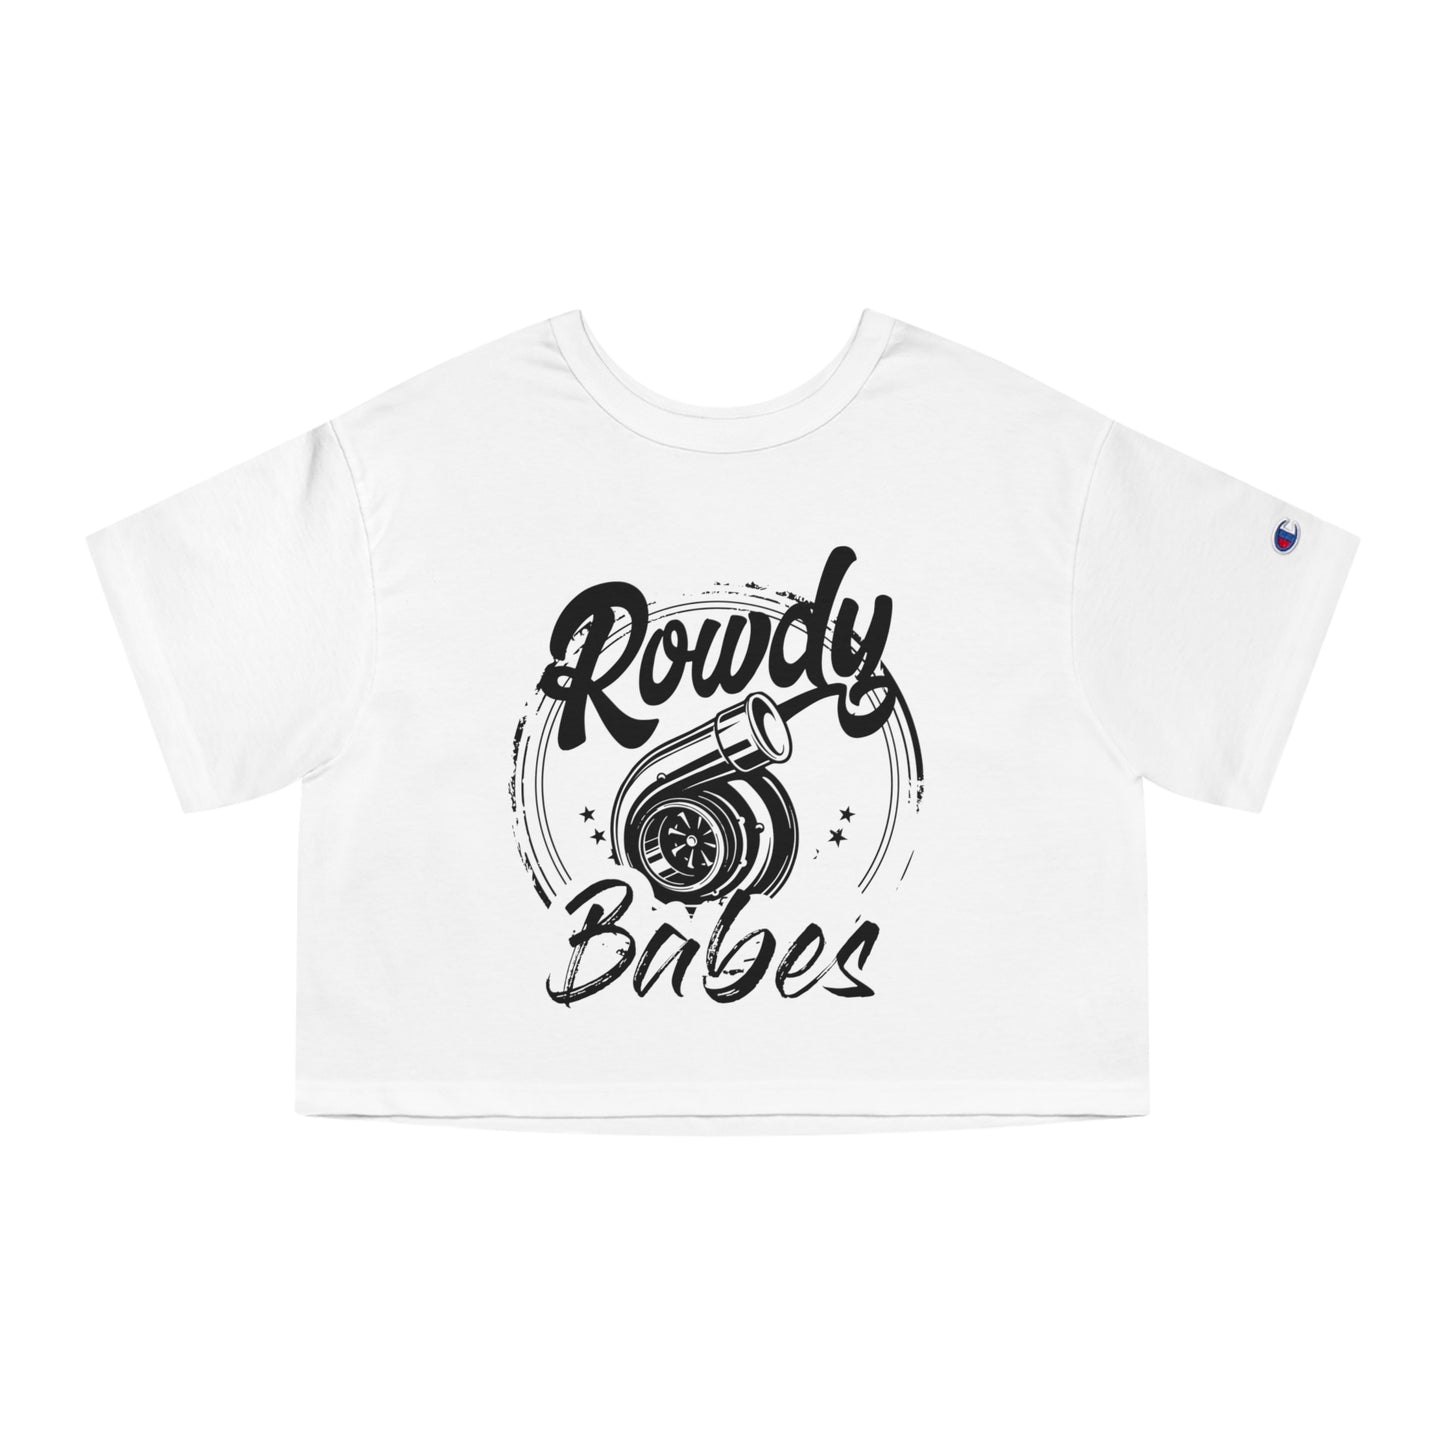 Rowdy Babes Women's Heritage Cropped T-Shirt